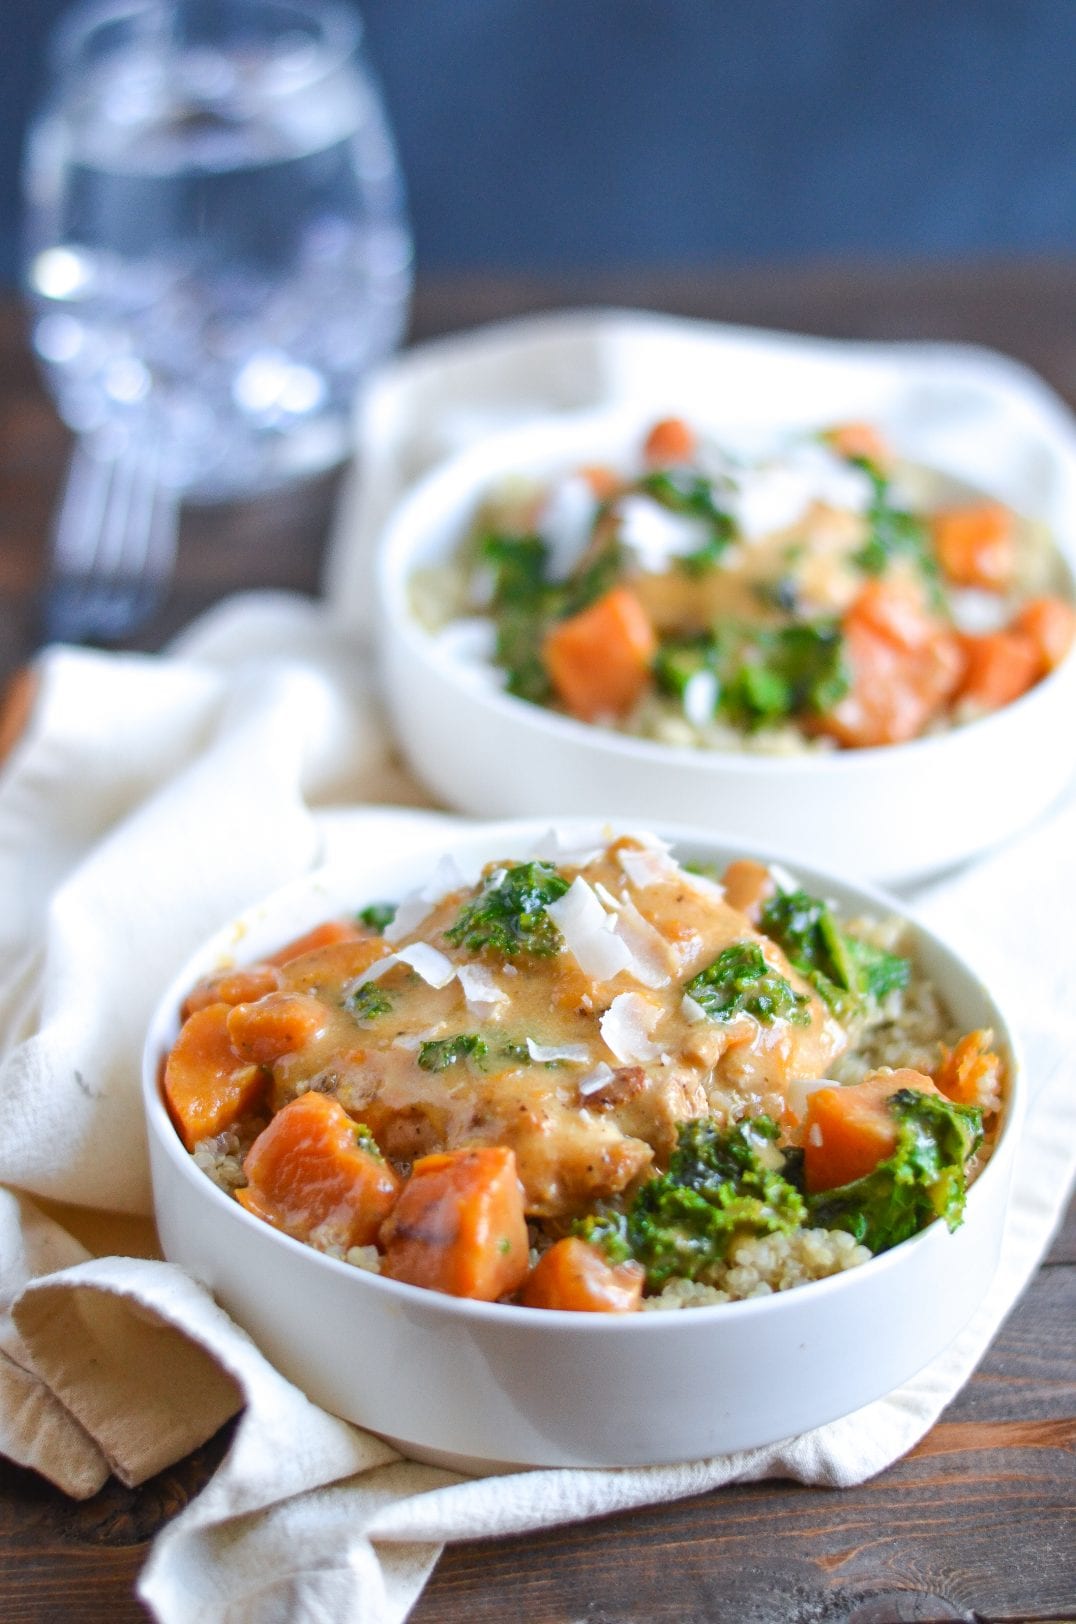 Coconut Braised Chicken Thighs with Kale and Sweet Potatoes